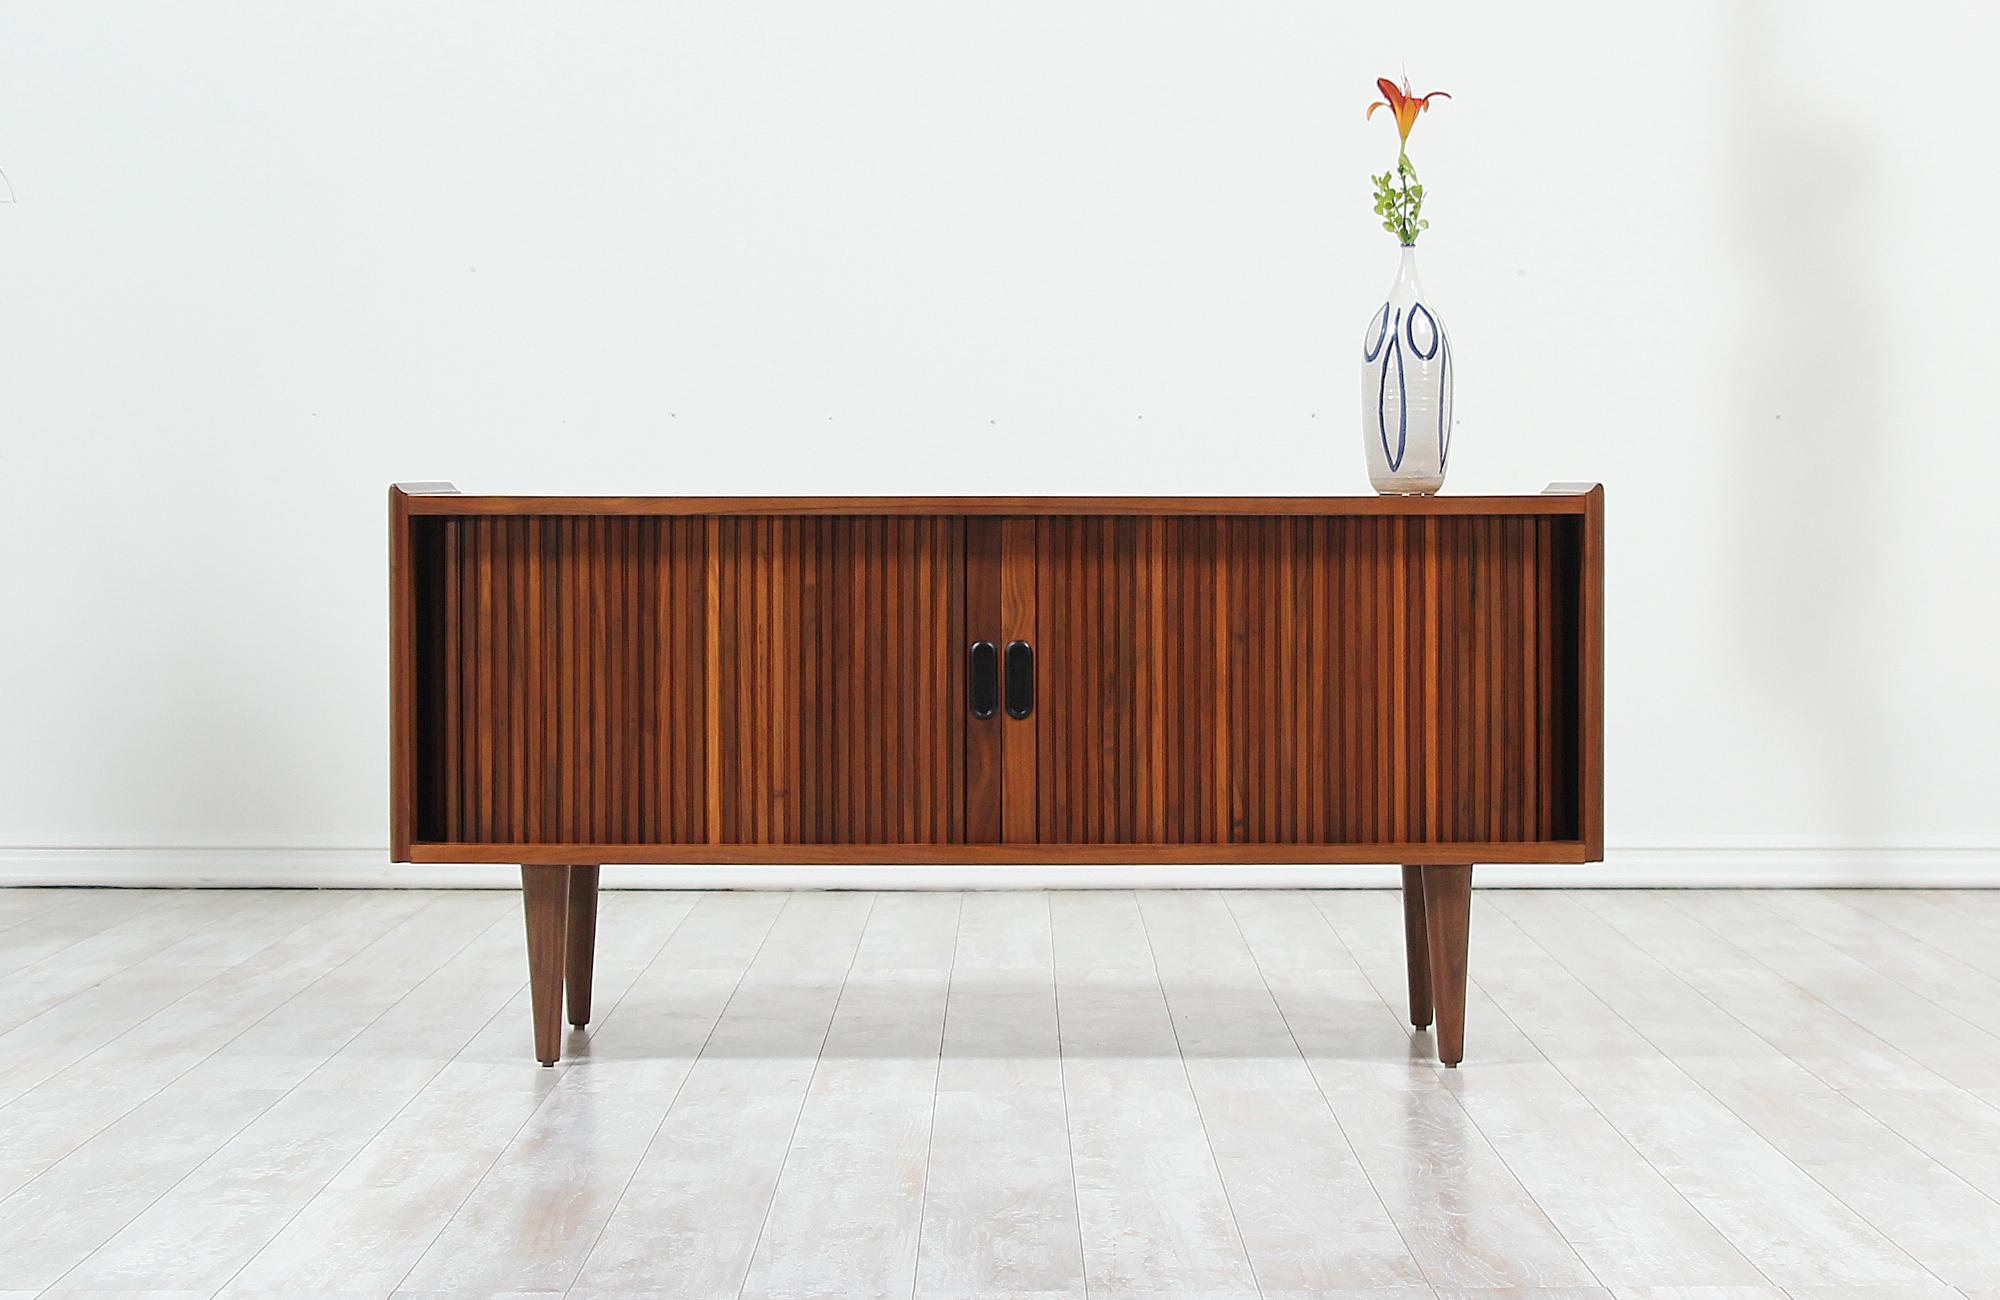 Compact Mid-Century Modern tambour-door credenza designed by Merton L. Gershun for Dillingham in the United States, circa 1960s. Impeccably crafted with walnut wood and newly refinished by our skilled craftsmen, this credenza features two tambour